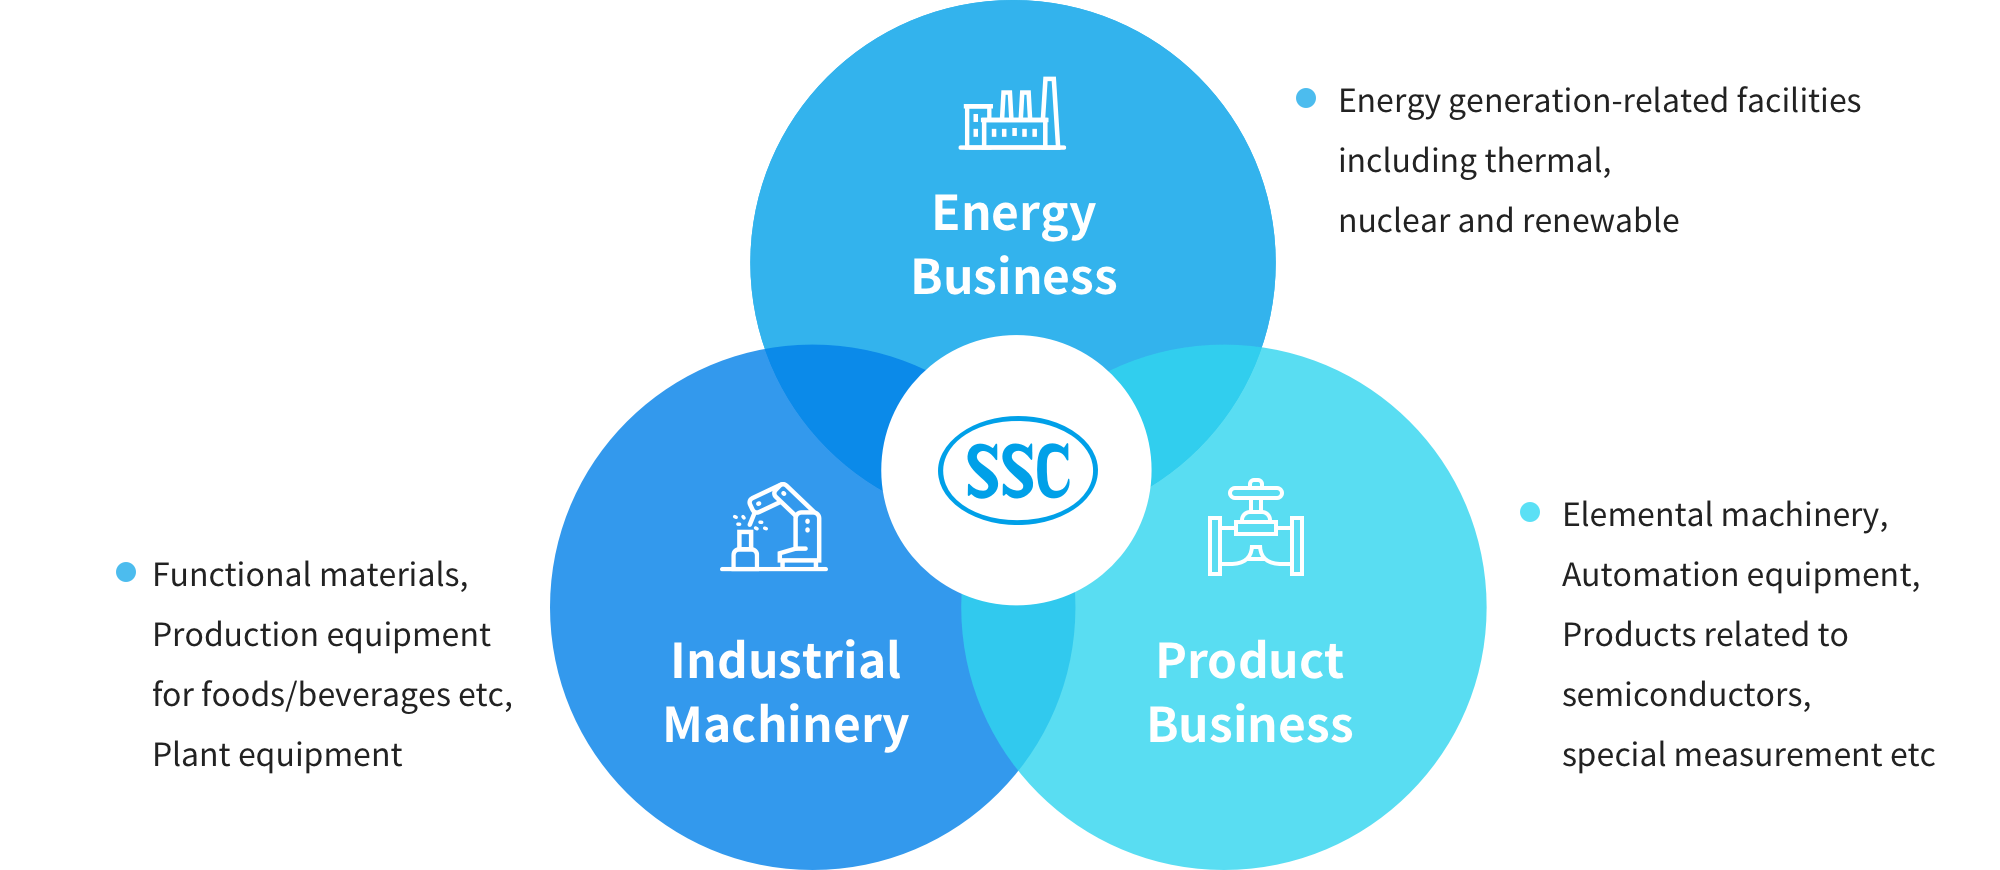 Three Business Sectors: Energy Business, Product Business, Industrial Machinery